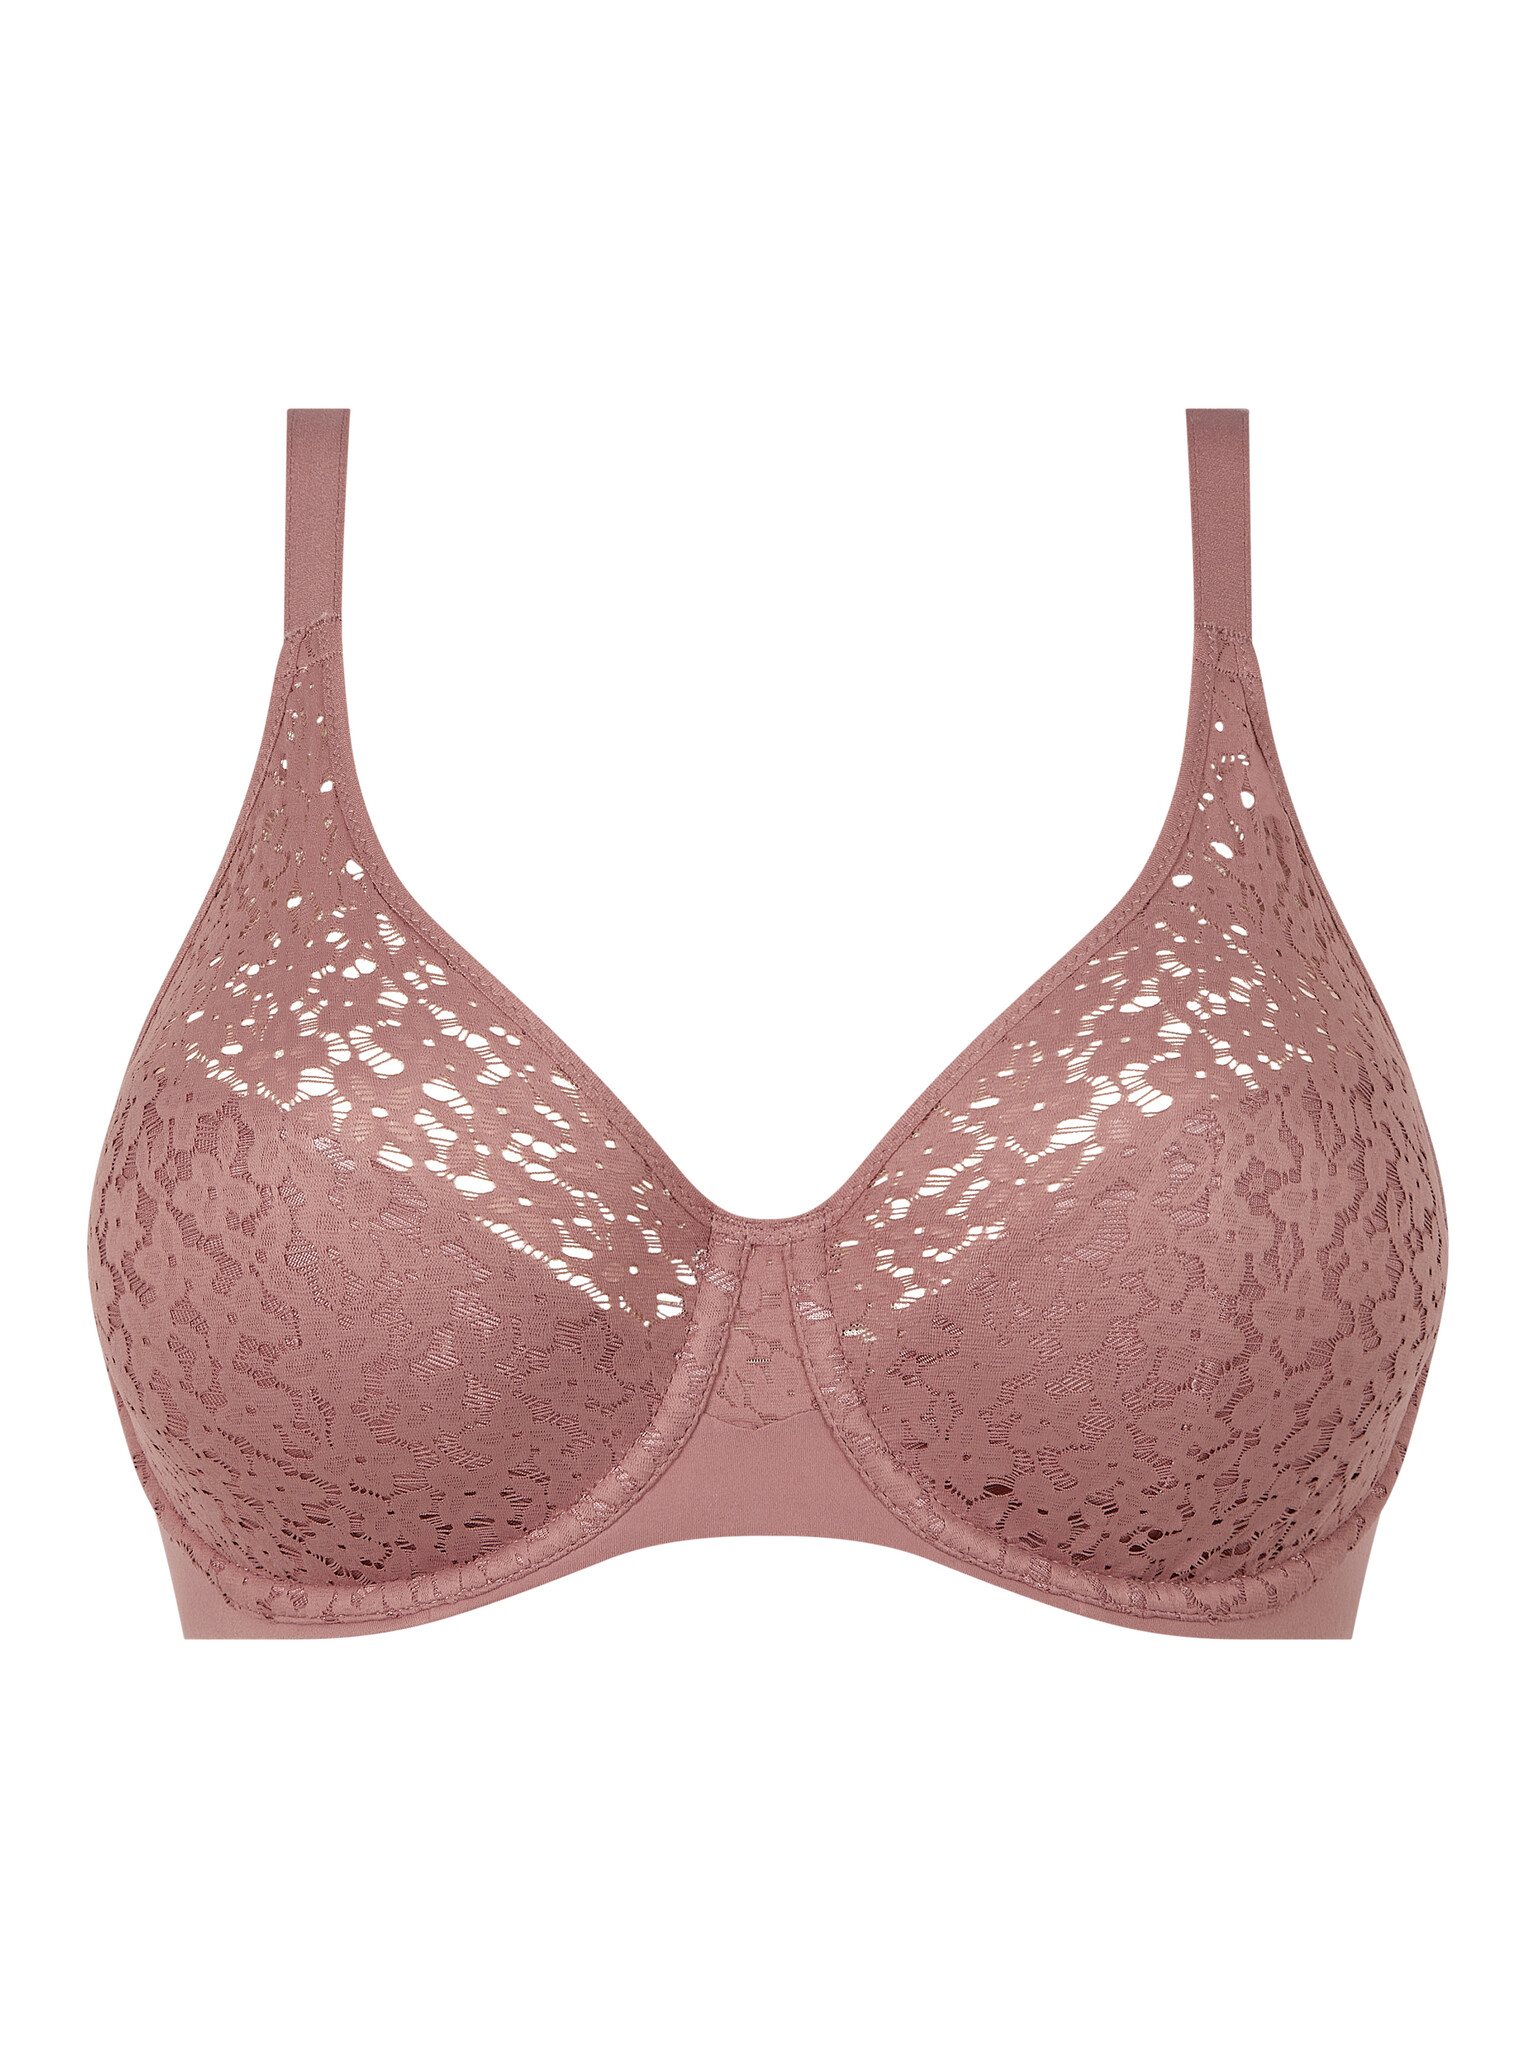 Henne & Day Lace C13F10 Molded - Norah (05H) Bra